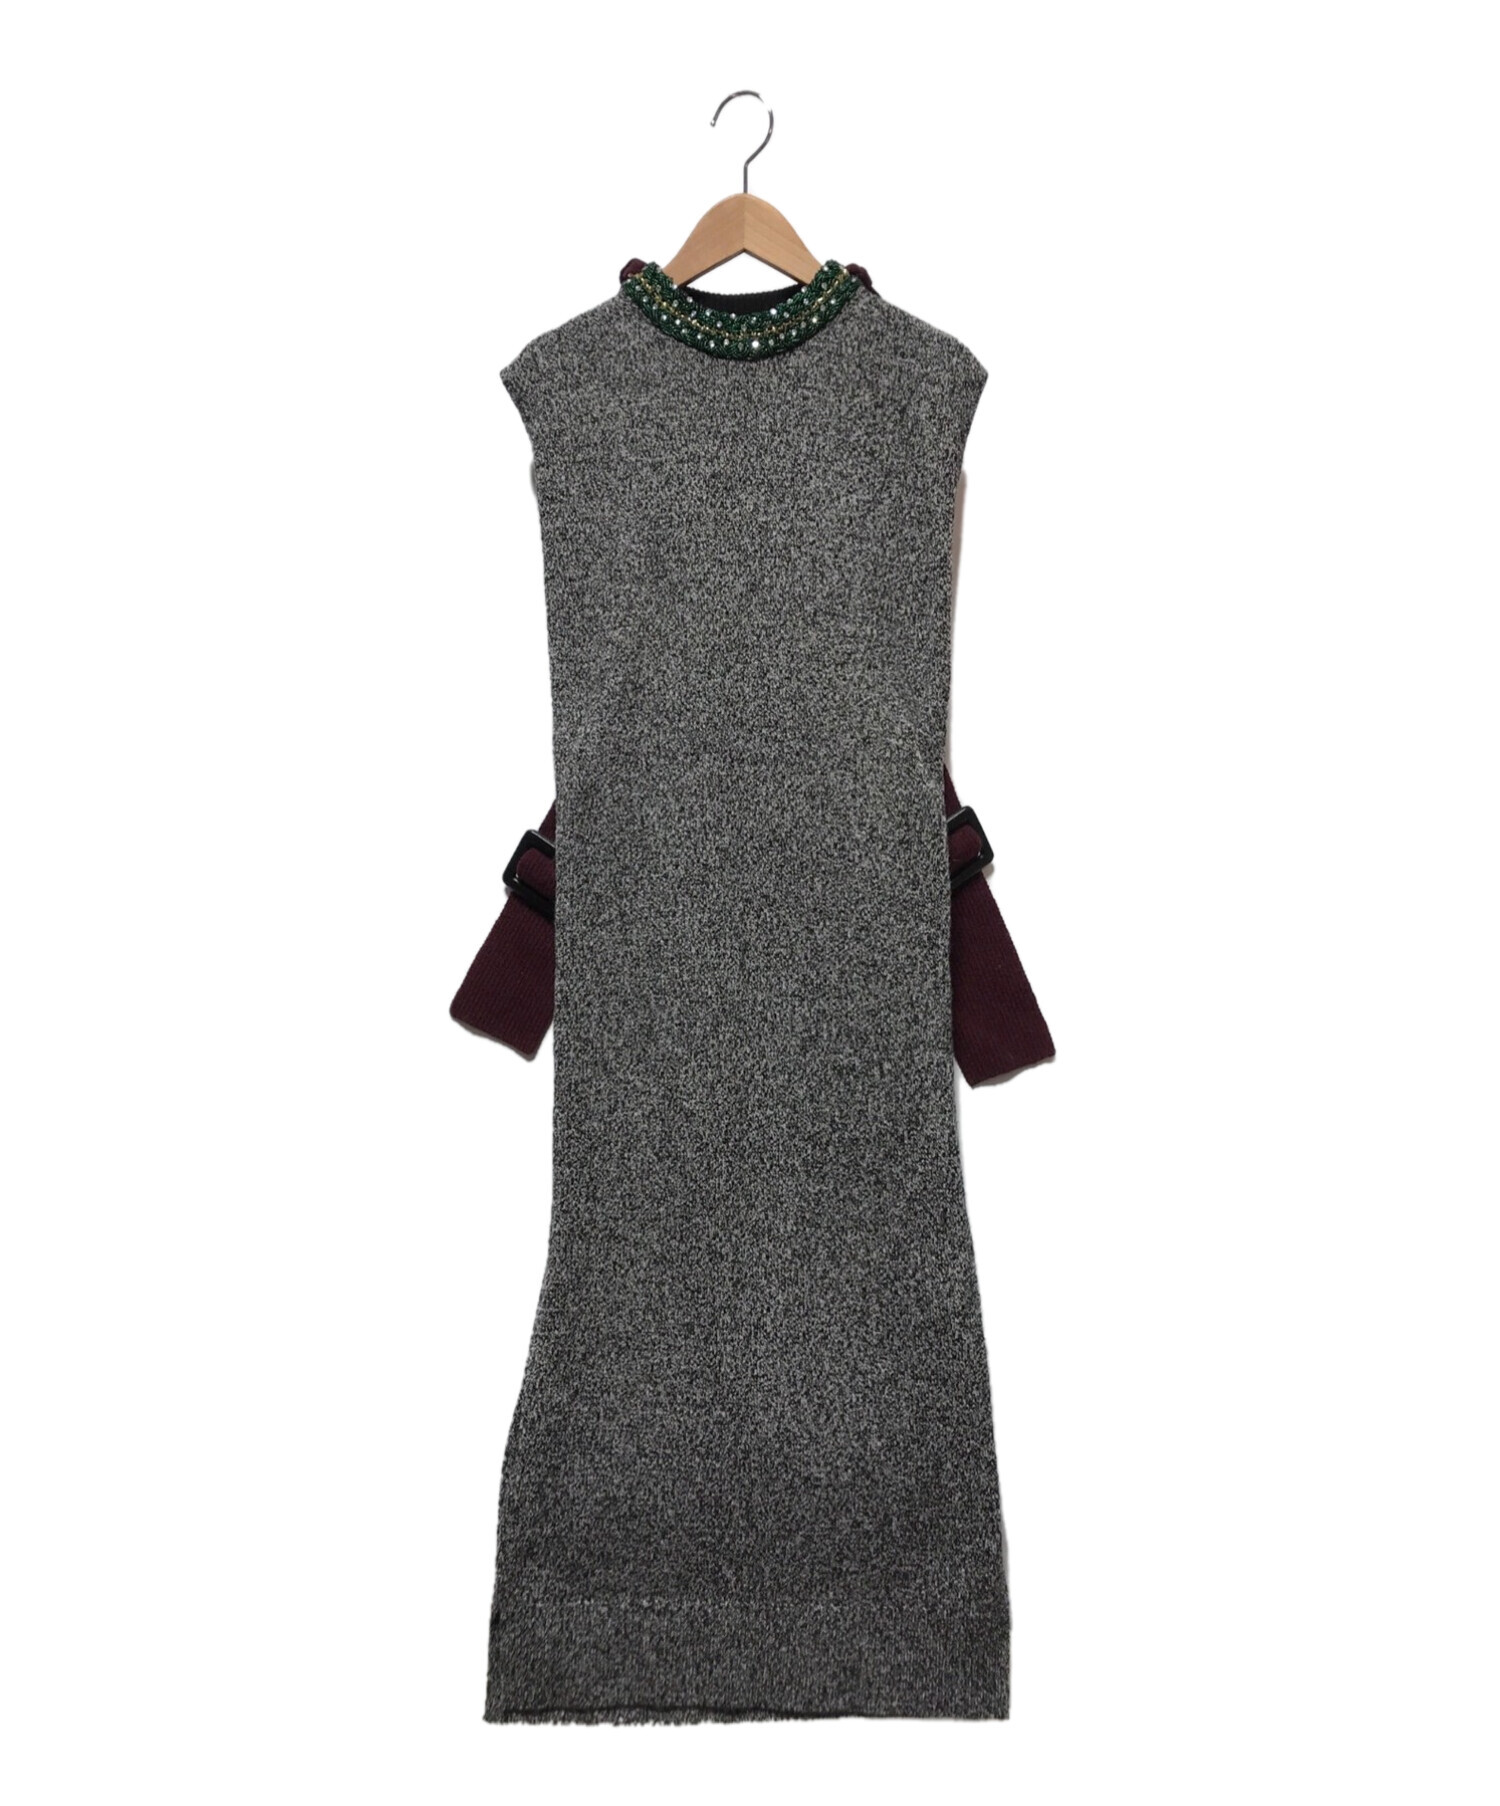 TOGA cable knit dress ワンピース